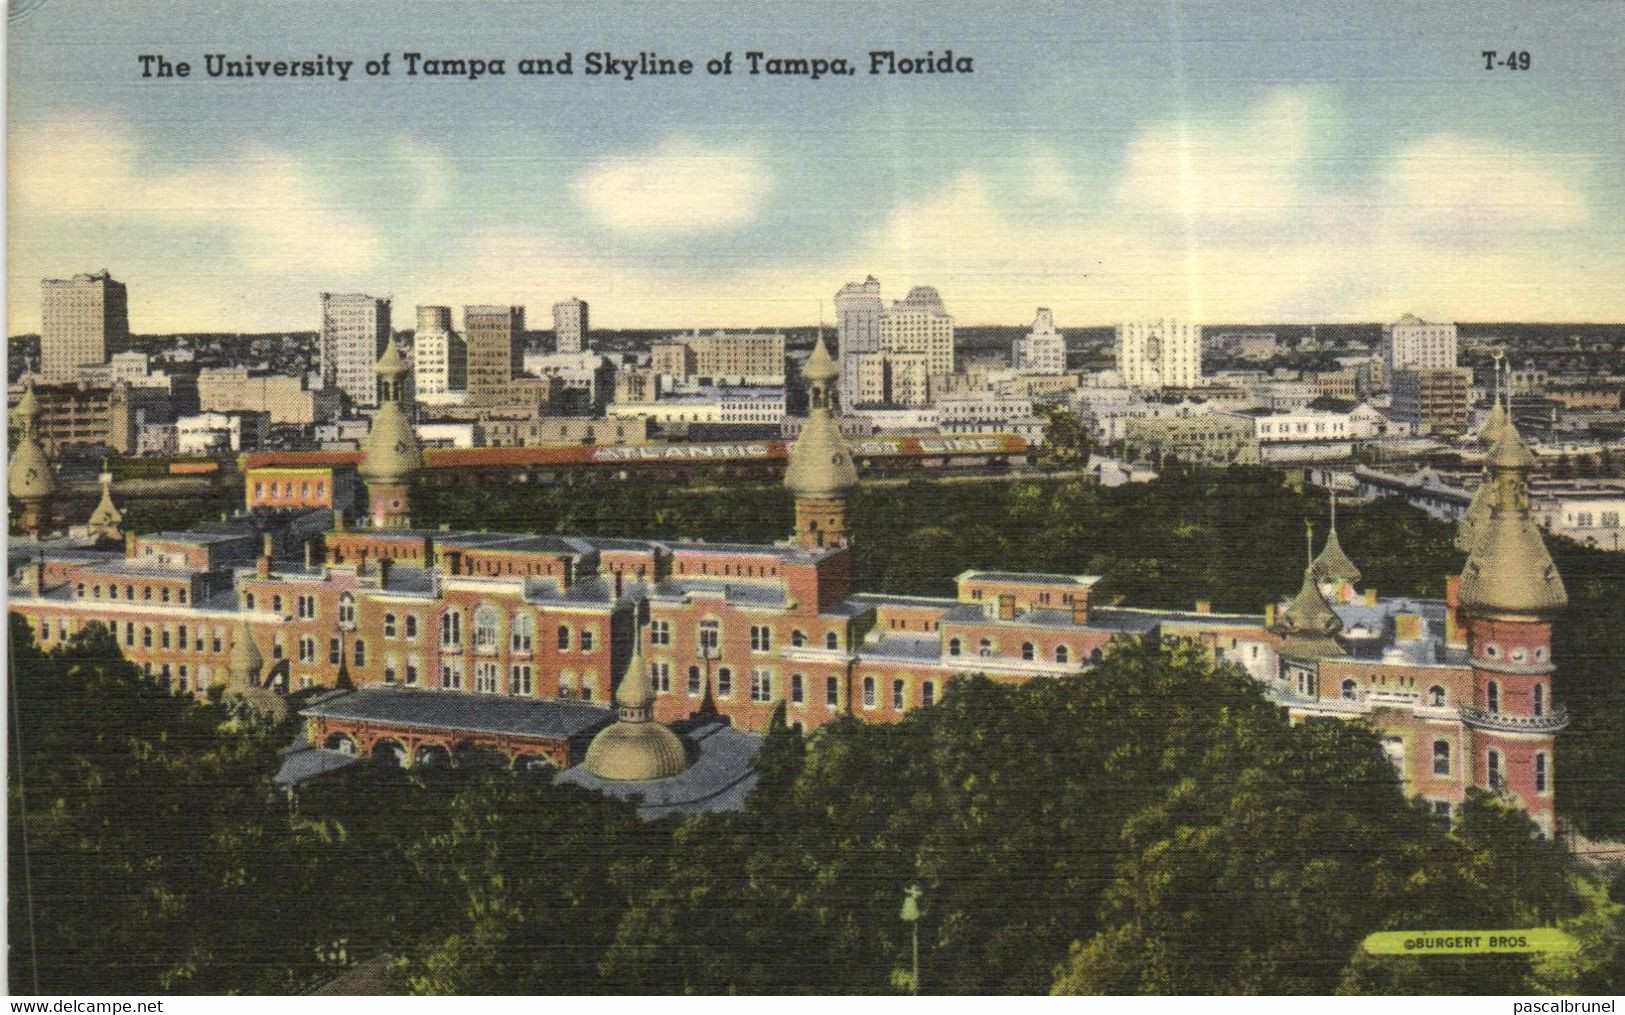 TAMPA - THE UNIVERSITY OF TAMPA AND SKYLINE - Tampa